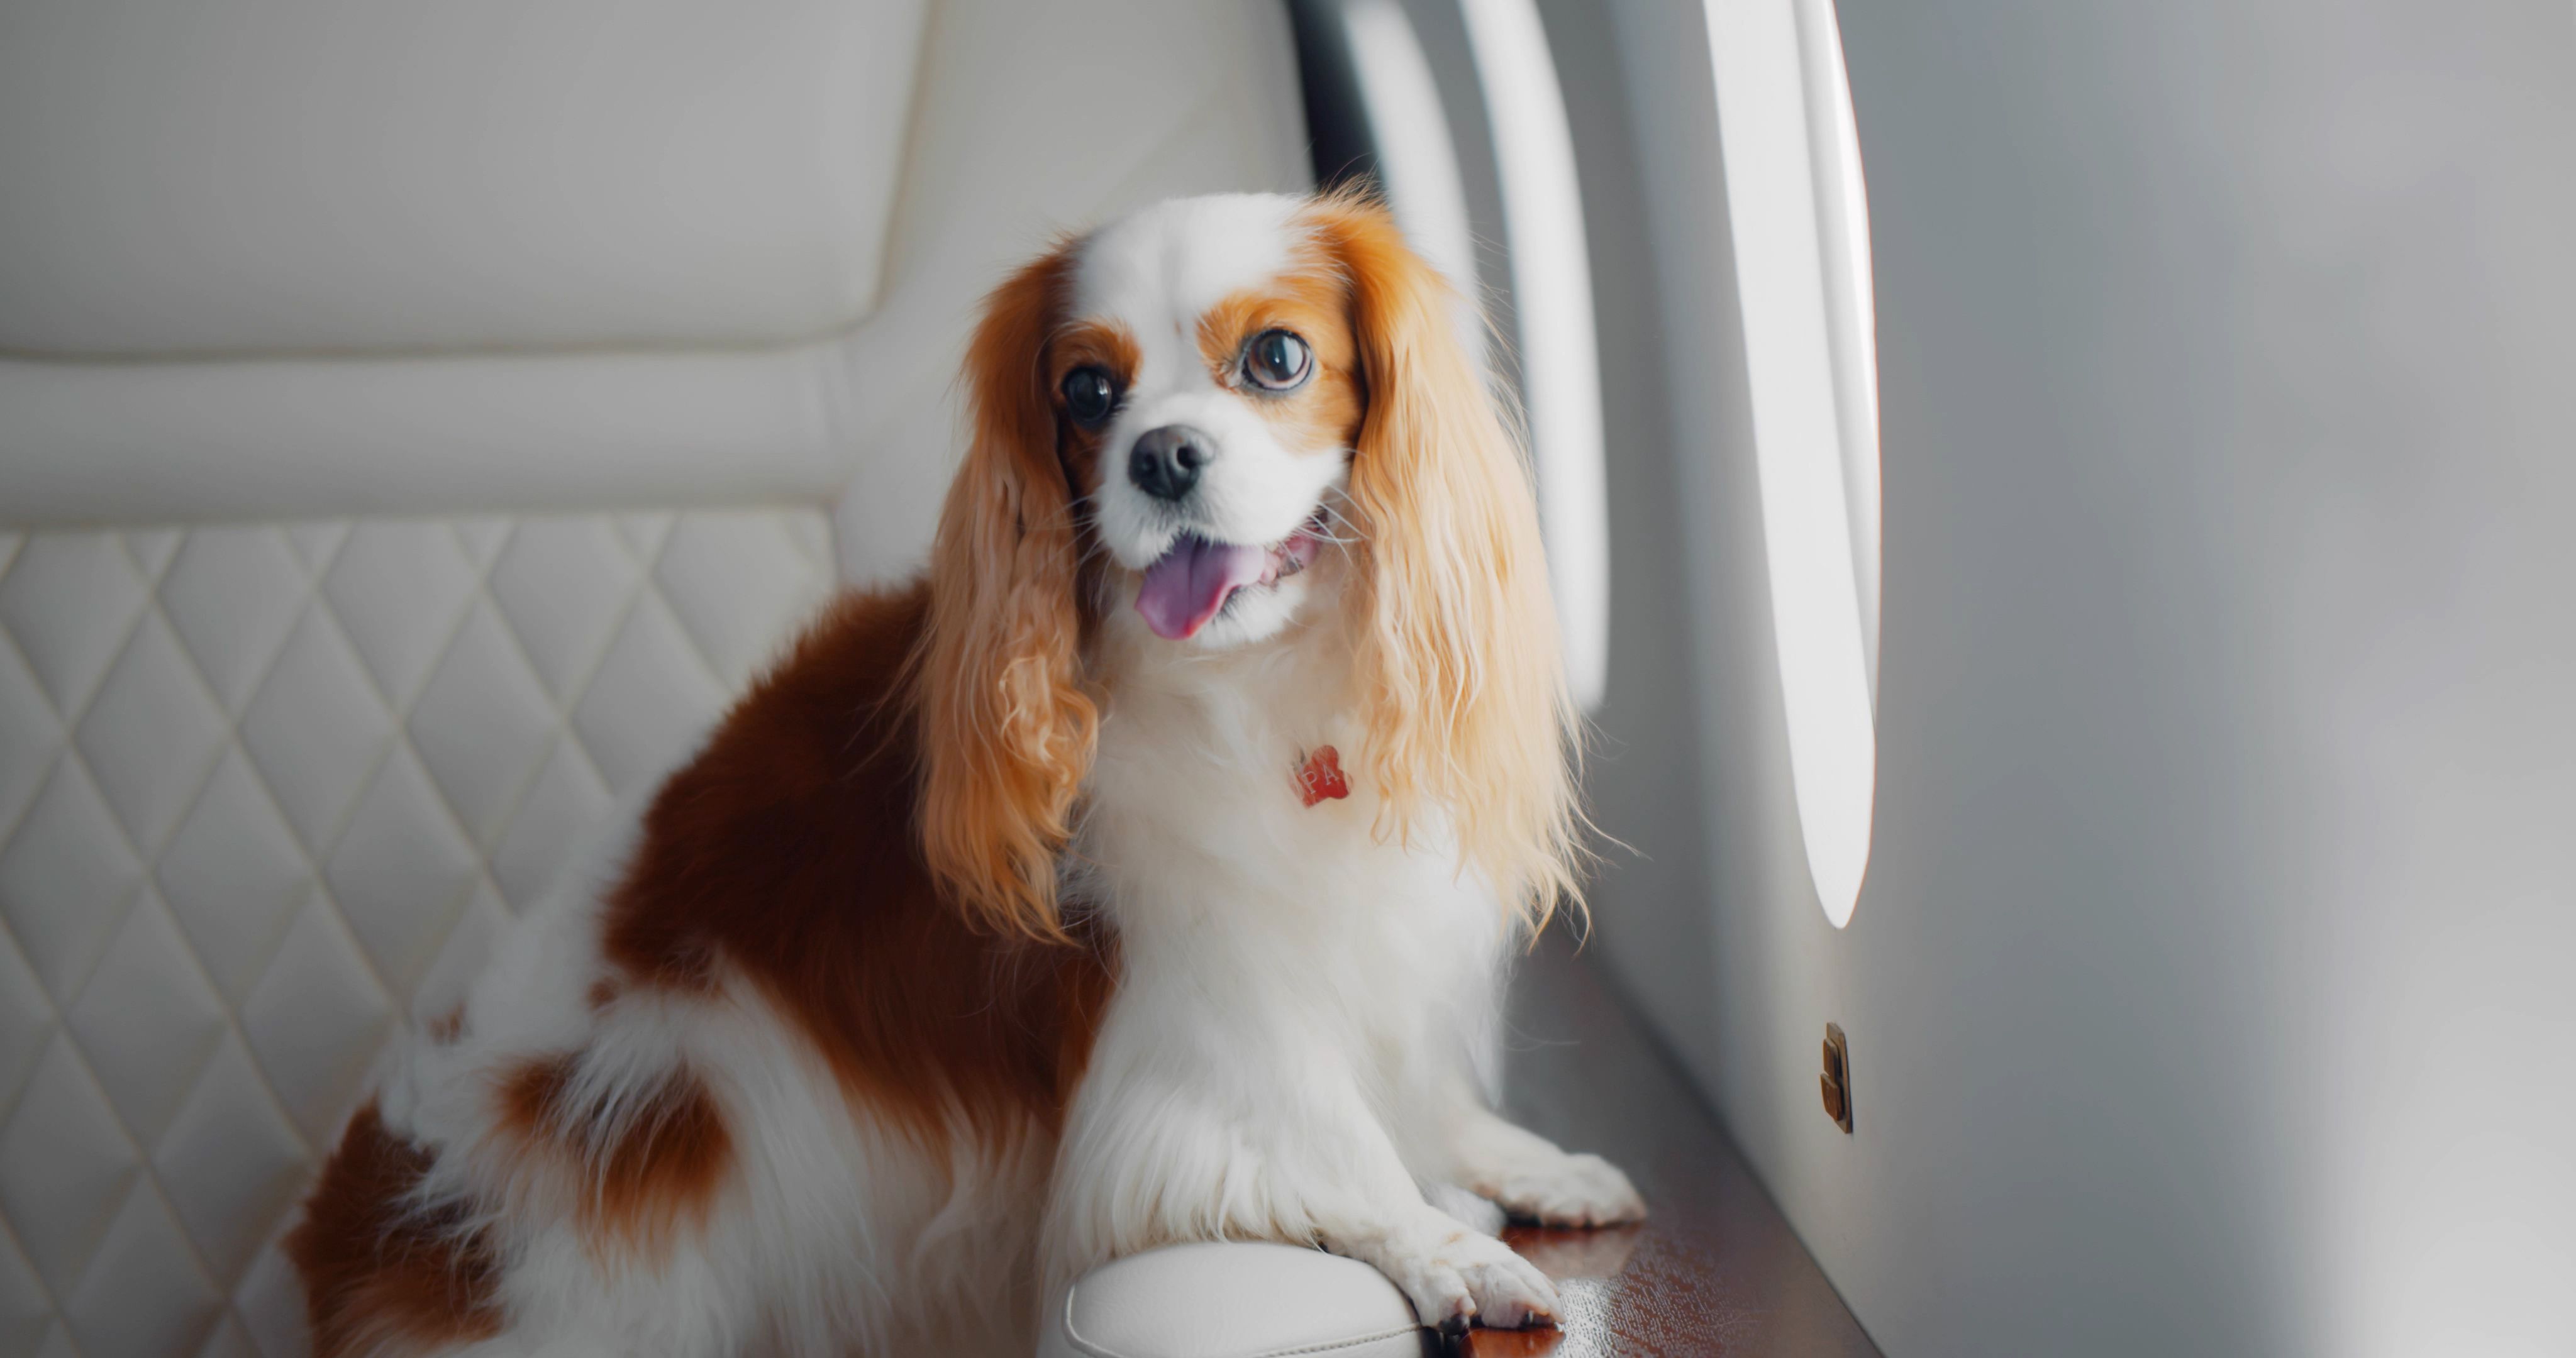 4 pet travel safety tips